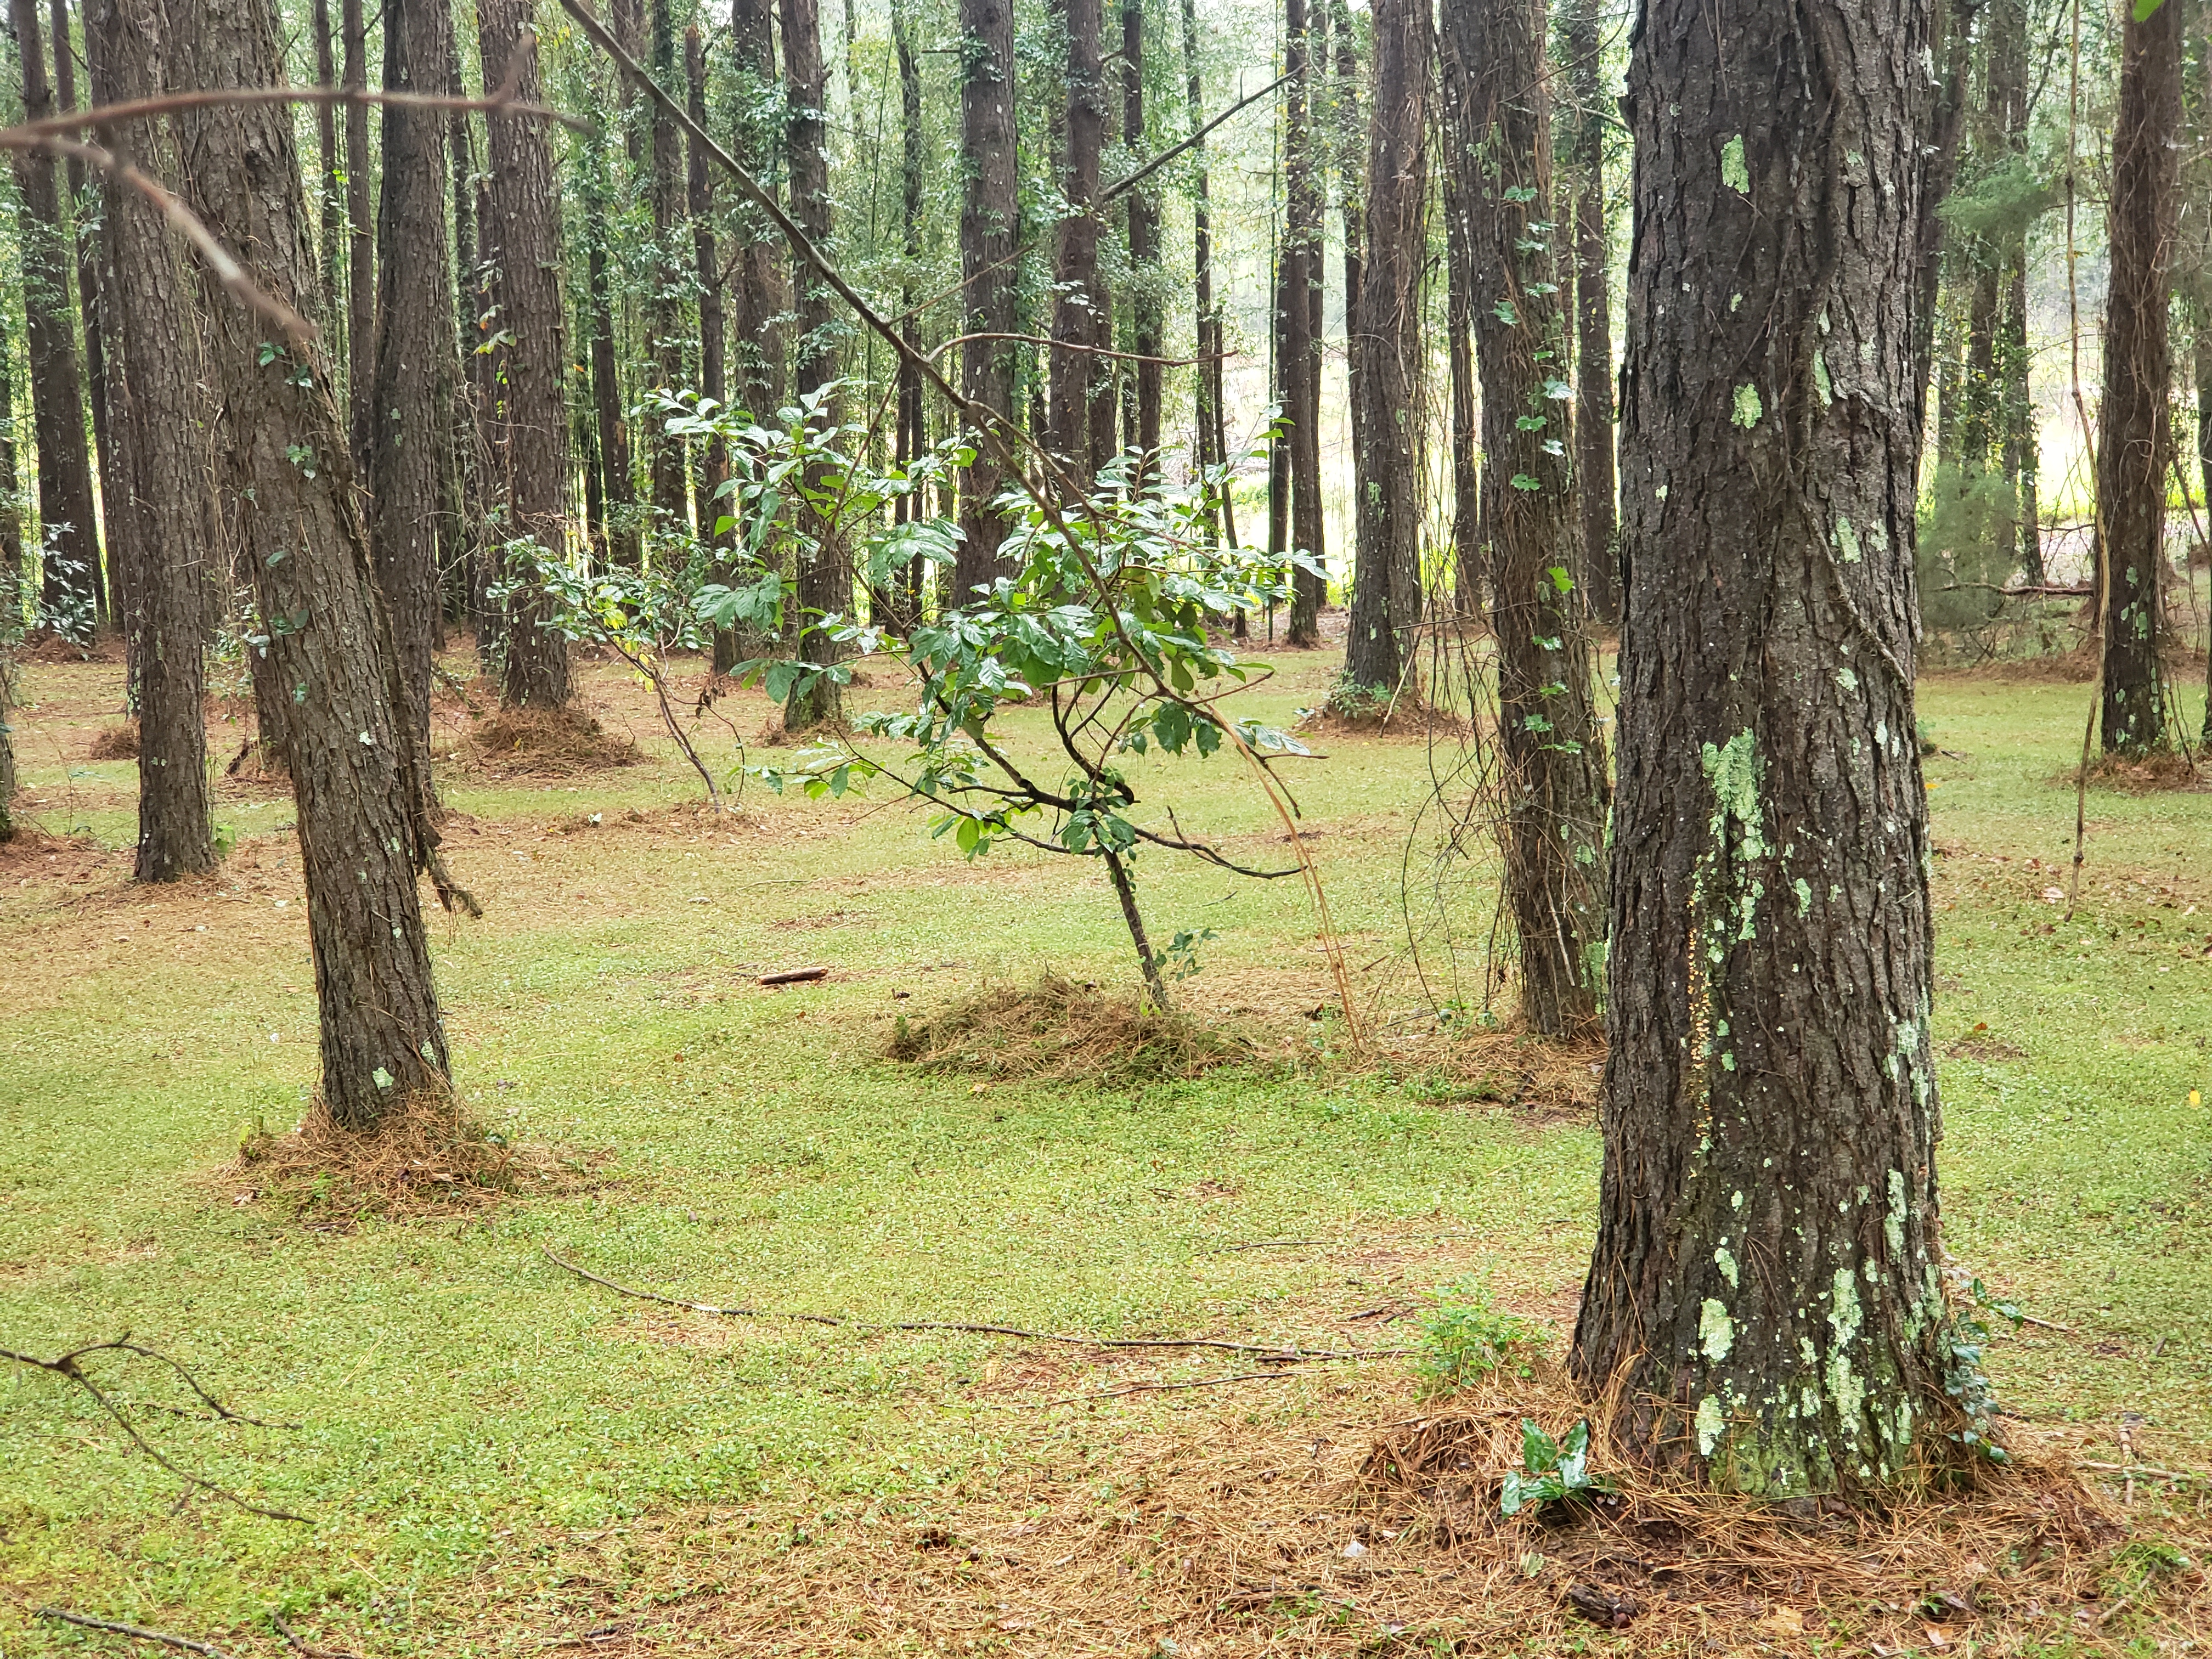 Photograph of a mowed stand of pine trees in Mississippi.